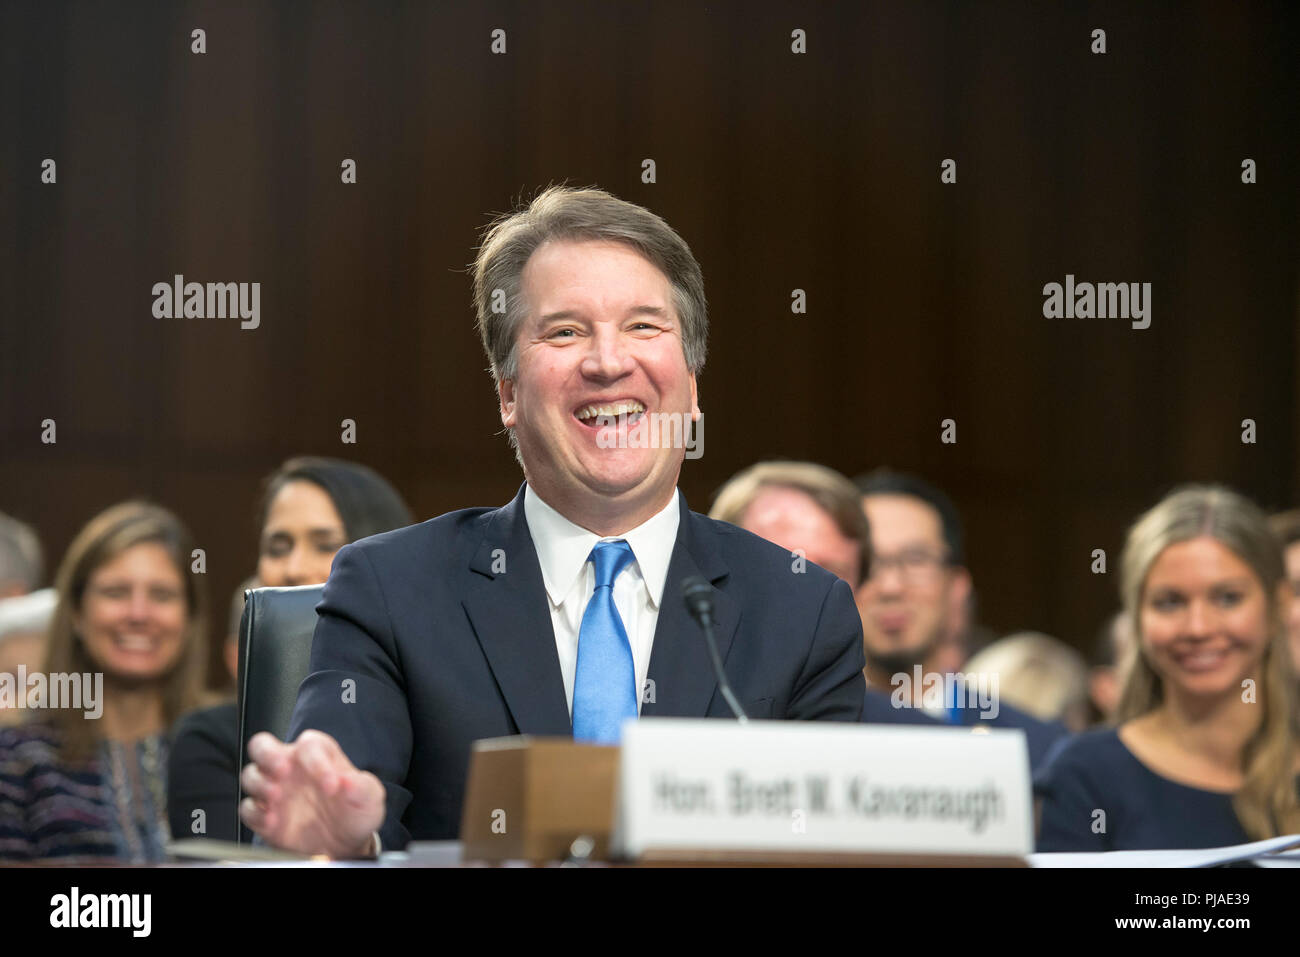 Washington DC, USA. September 5,2018, USA: Judge Brett Kavanaugh attends his confirmation hearing to become the next Supreme Court Justice on Capitol Hill in Washington DC.   Patsy Lynch/Alamy Credit: Patsy Lynch/Alamy Live News Stock Photo